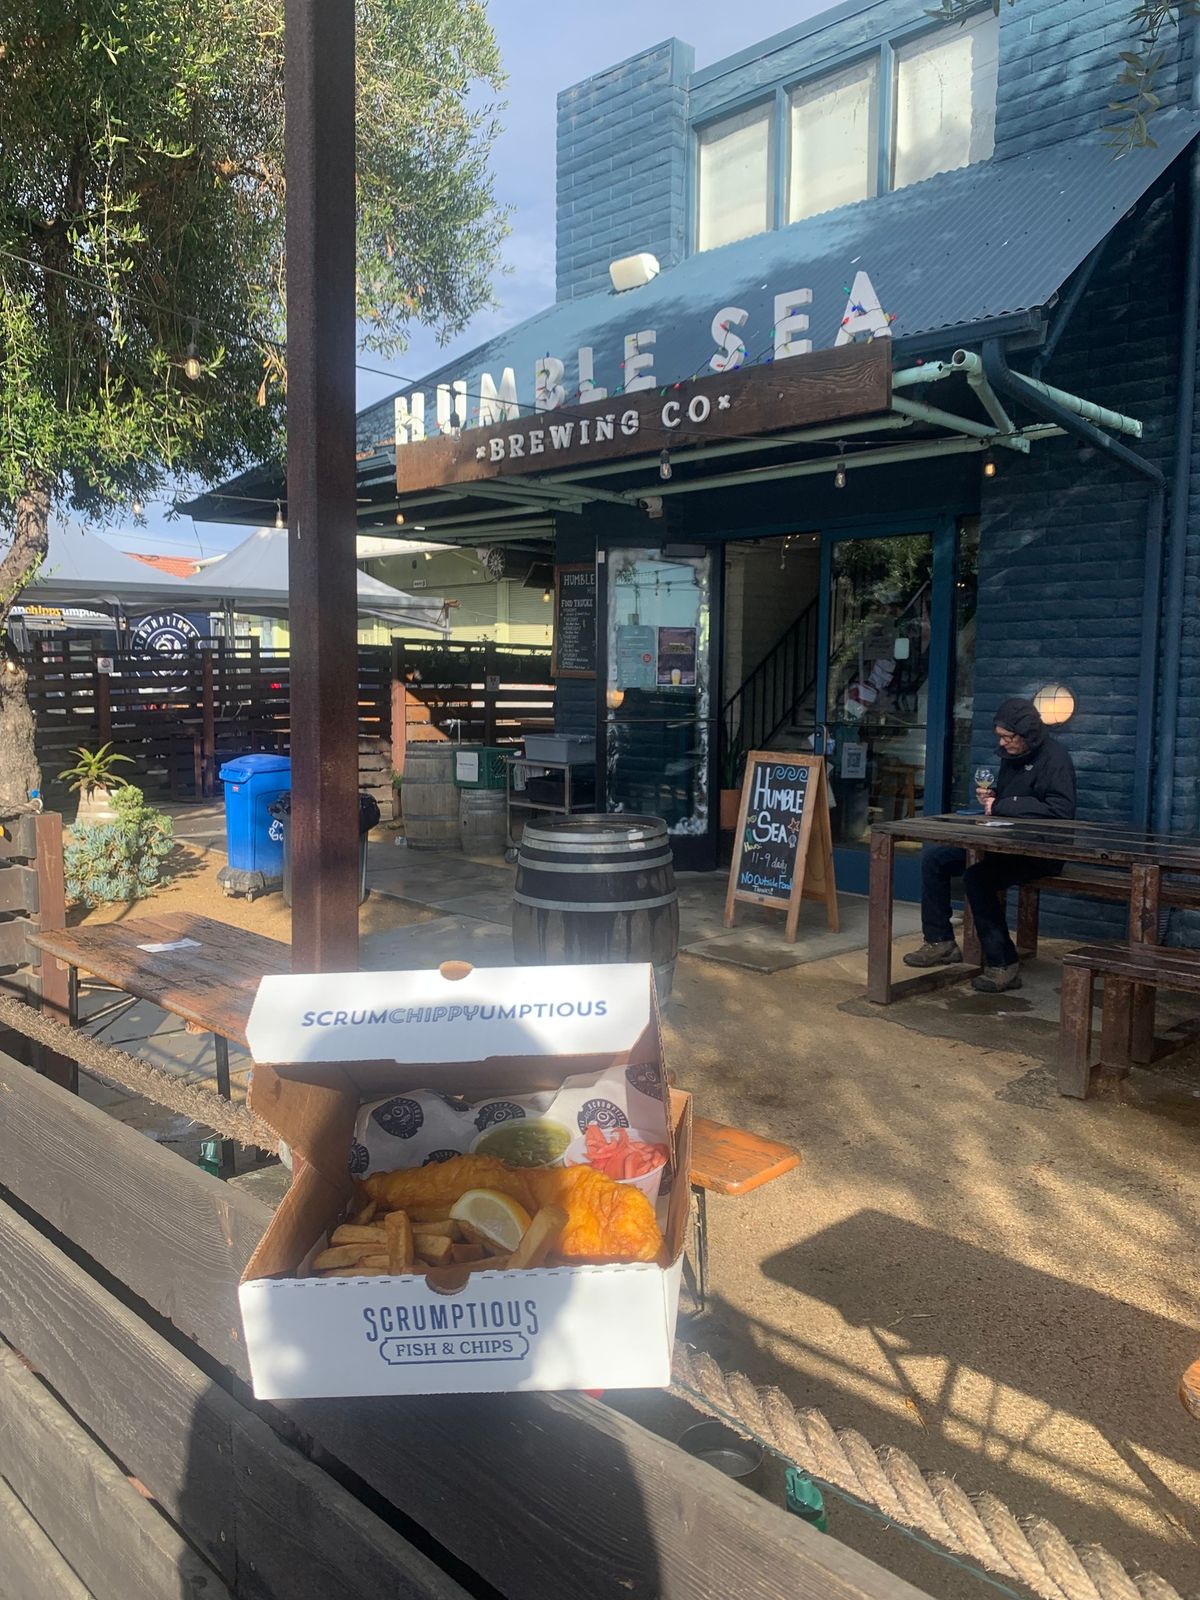 Scrumptious Fish & Chips @ Humble Sea Brewery